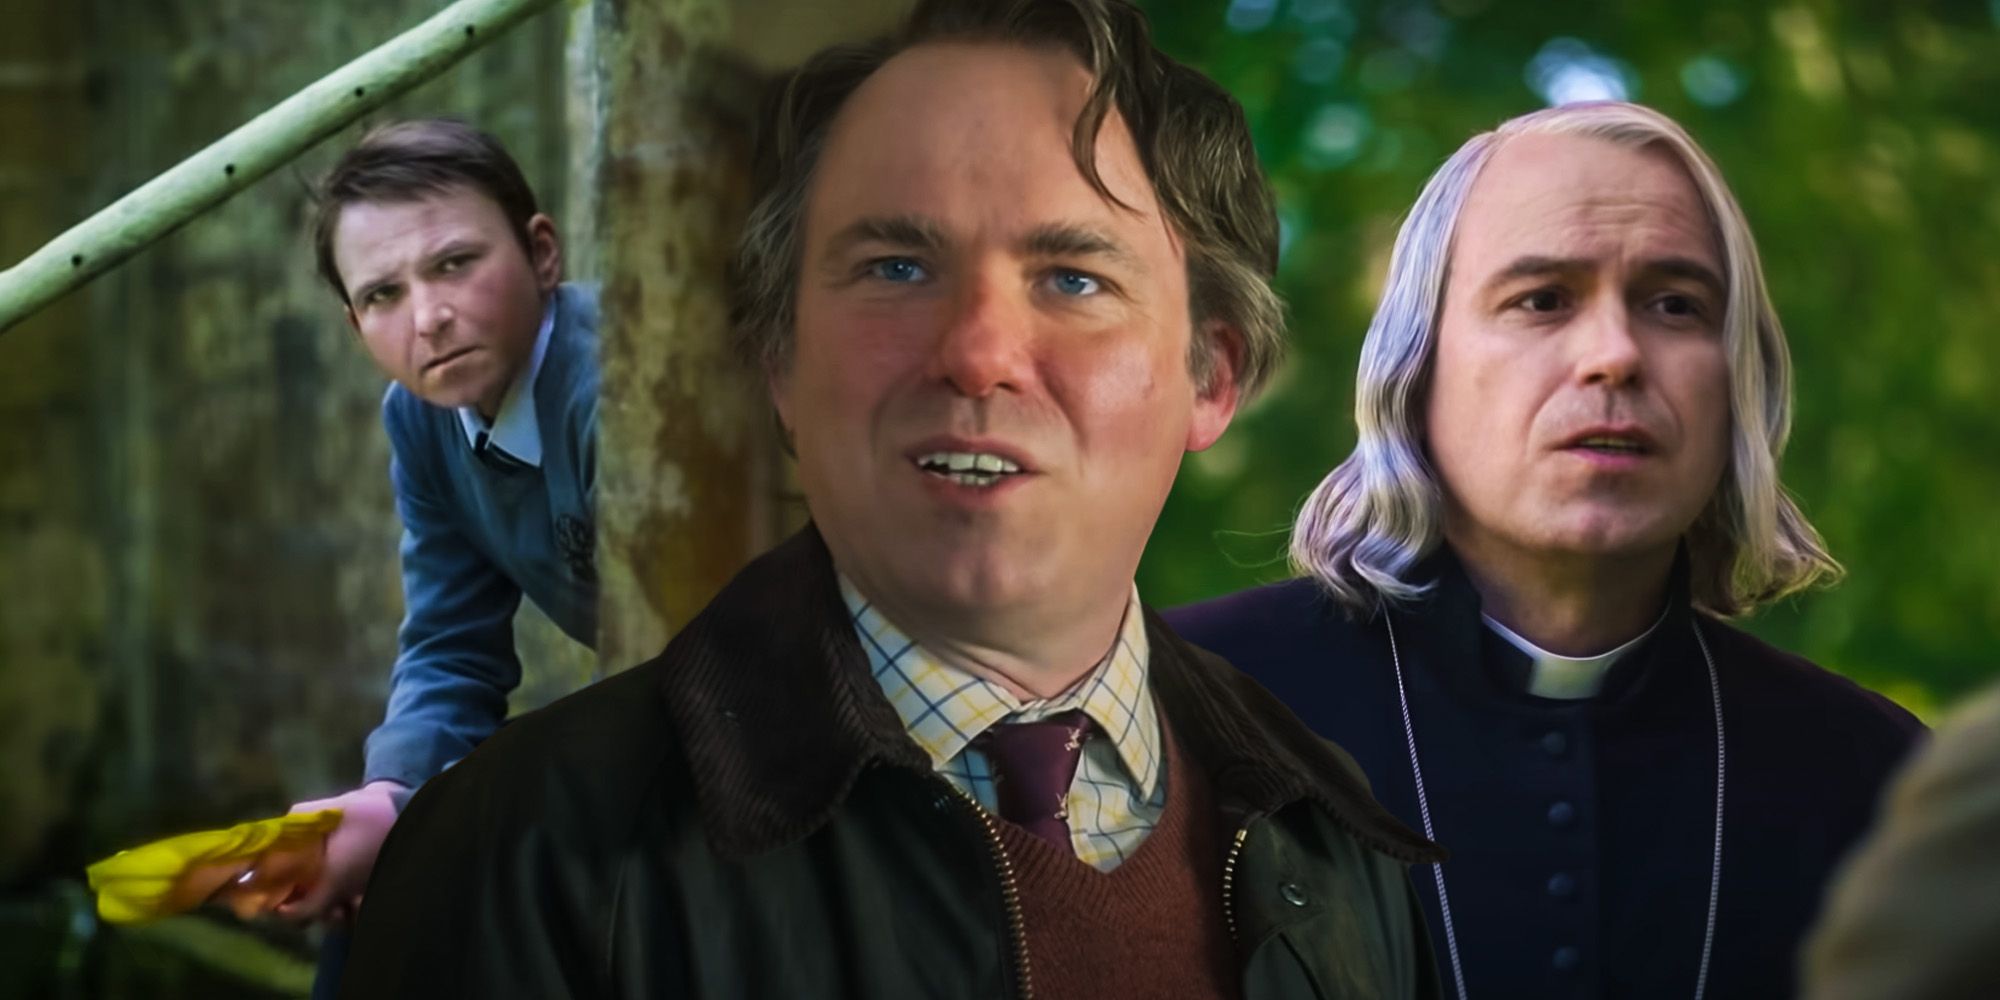 Samuel, Geoffrey and the Vicar played by Rory Kinnear in Men 2022